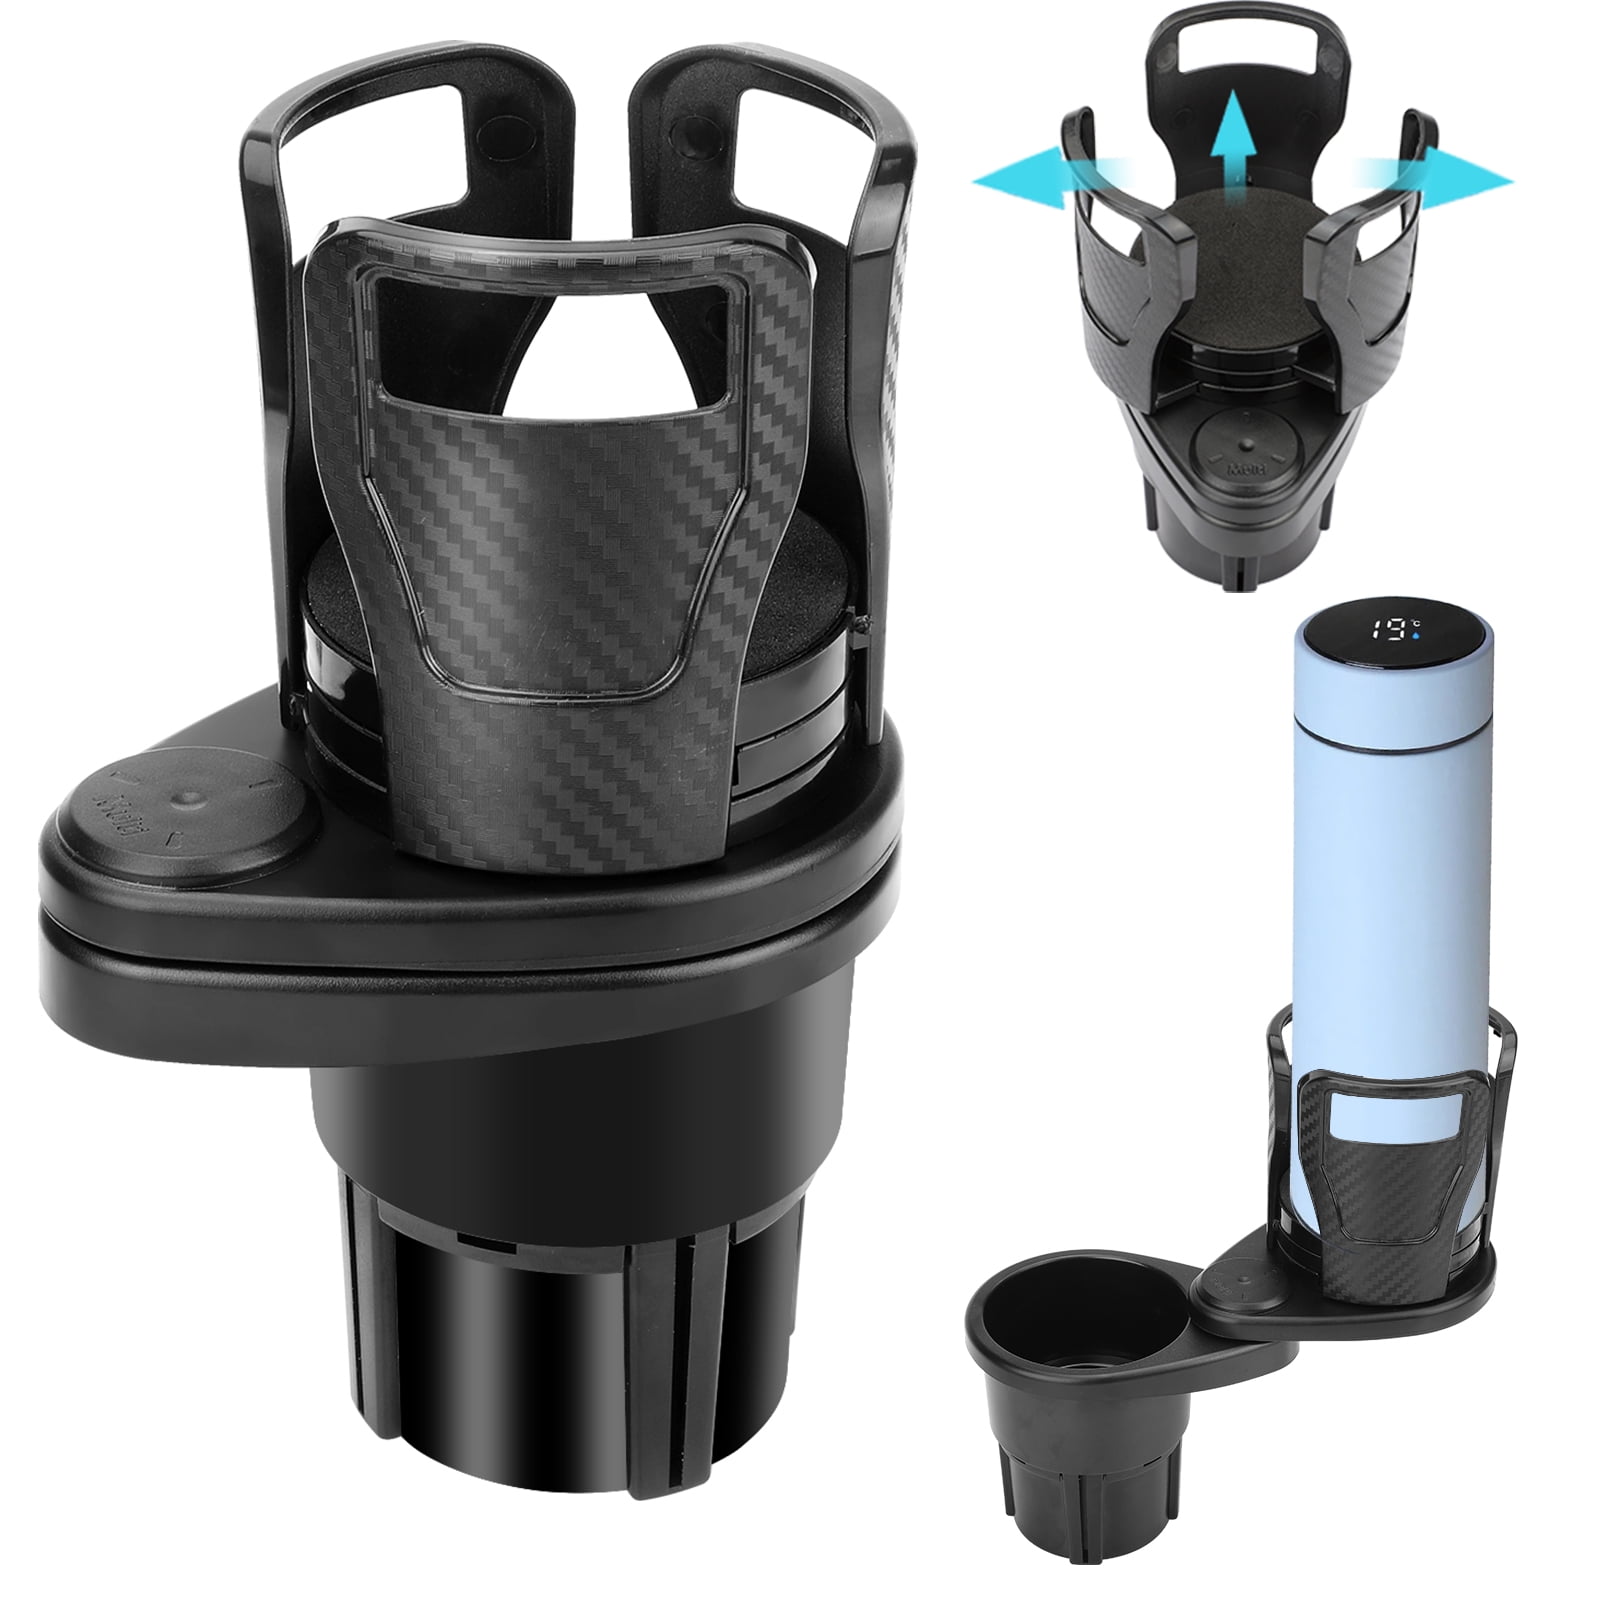 Cups 360 ° Rotatable Telescopic Adjustable Universal Vehicle-Mounted Car Drink Holder Non-slip for Water Bottle 4 in 1 Car Drink Cup Holder ADDLIVE Cup Holder for Cars Car Cup Holder Expander 